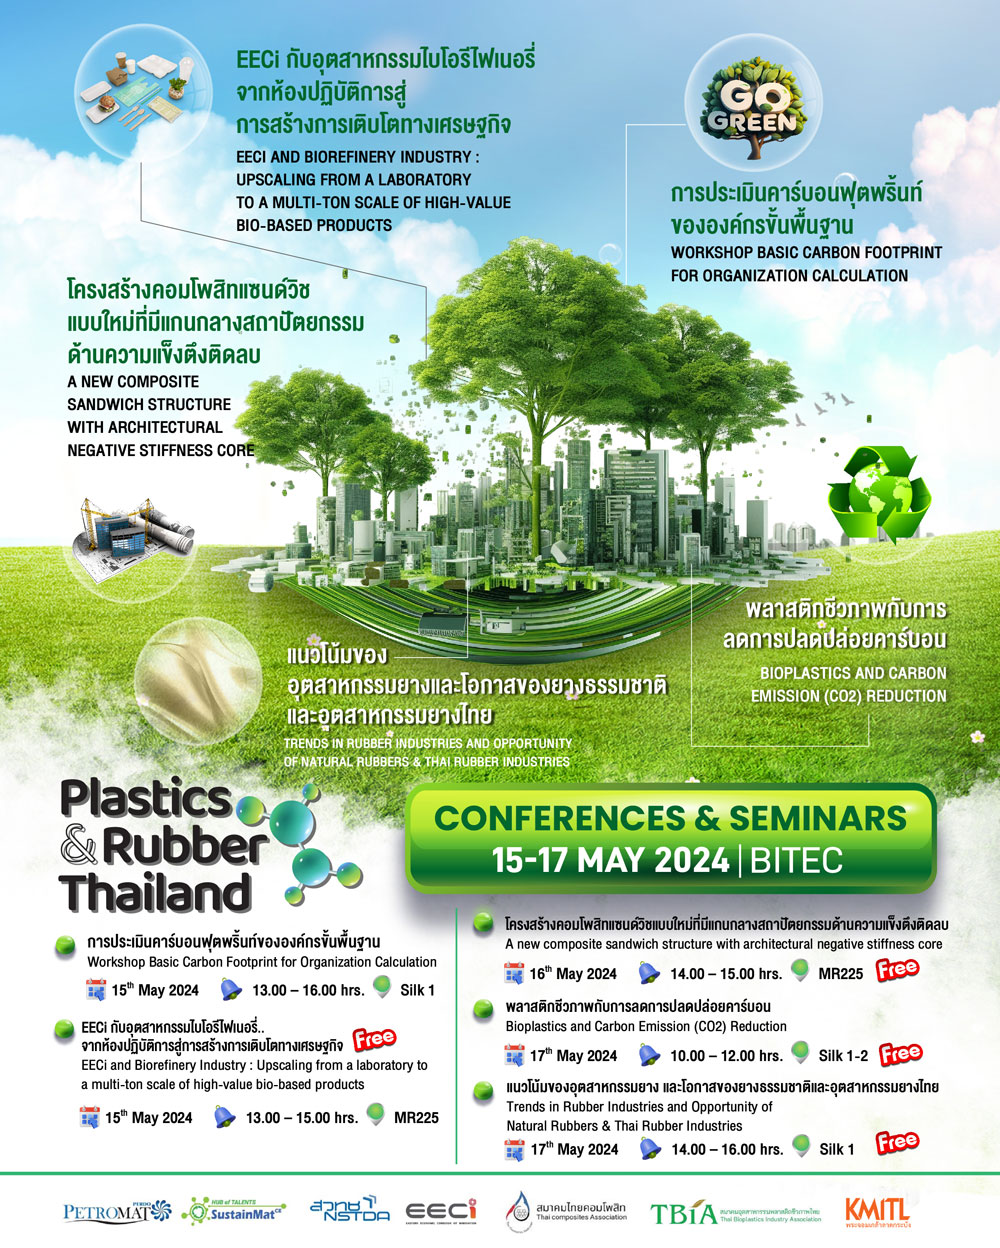 Don't miss out!!! Conferences of the year from leading organizations and associations 

at PLASTICS & RUBBER THAILAND 2024 ♻